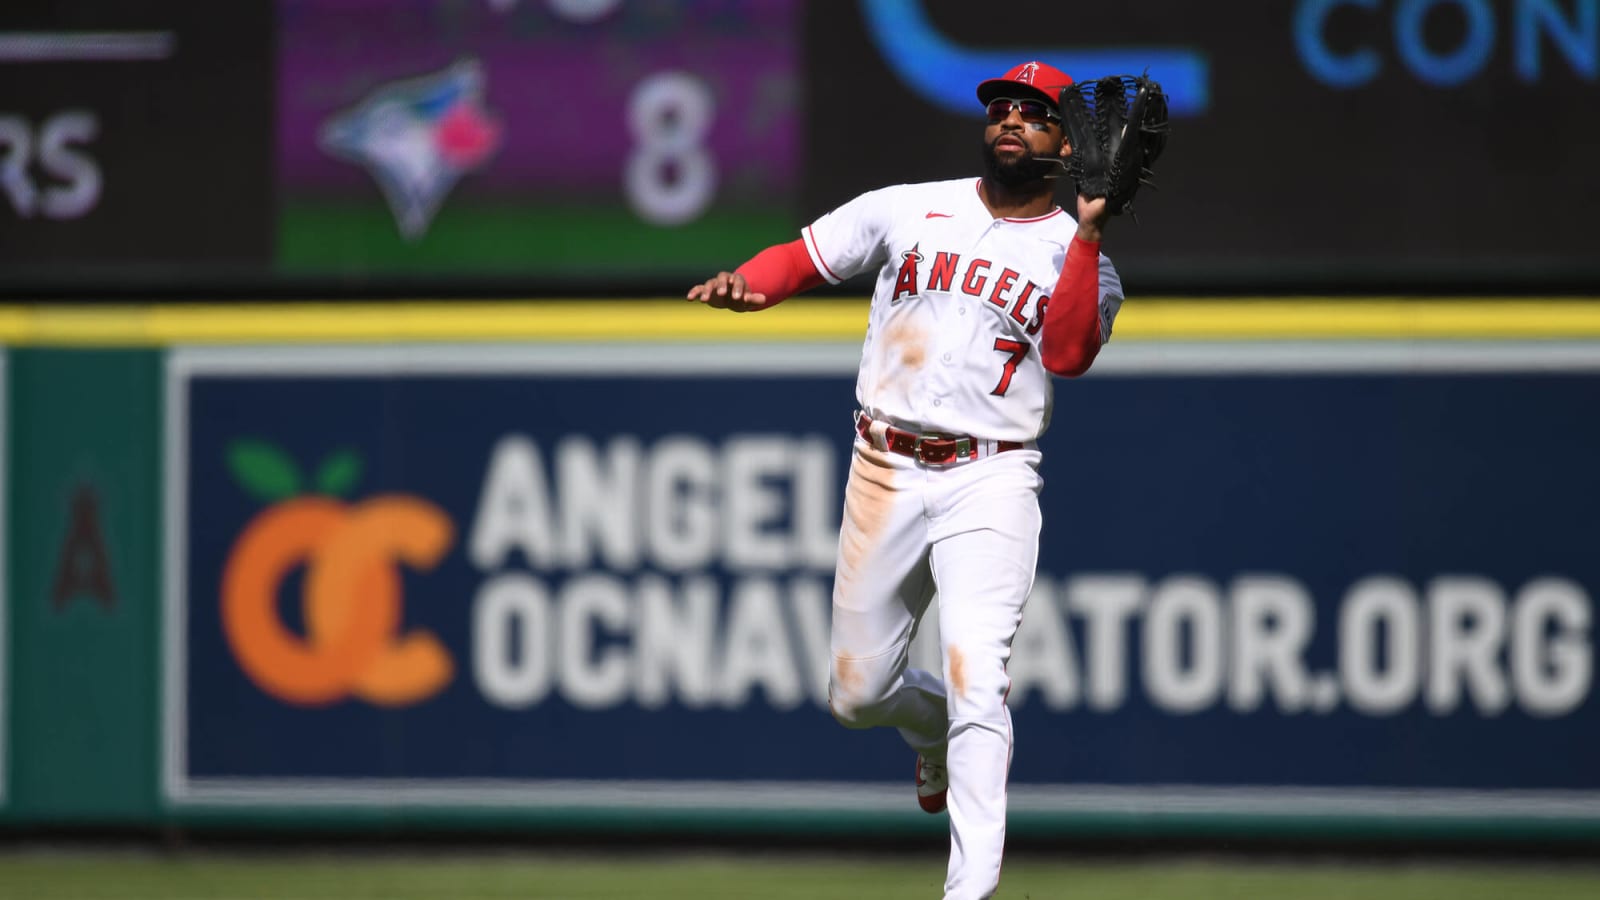 Perry Minasian: Jo Adell Understands ‘What’s At Stake’ Heading Into Next Season